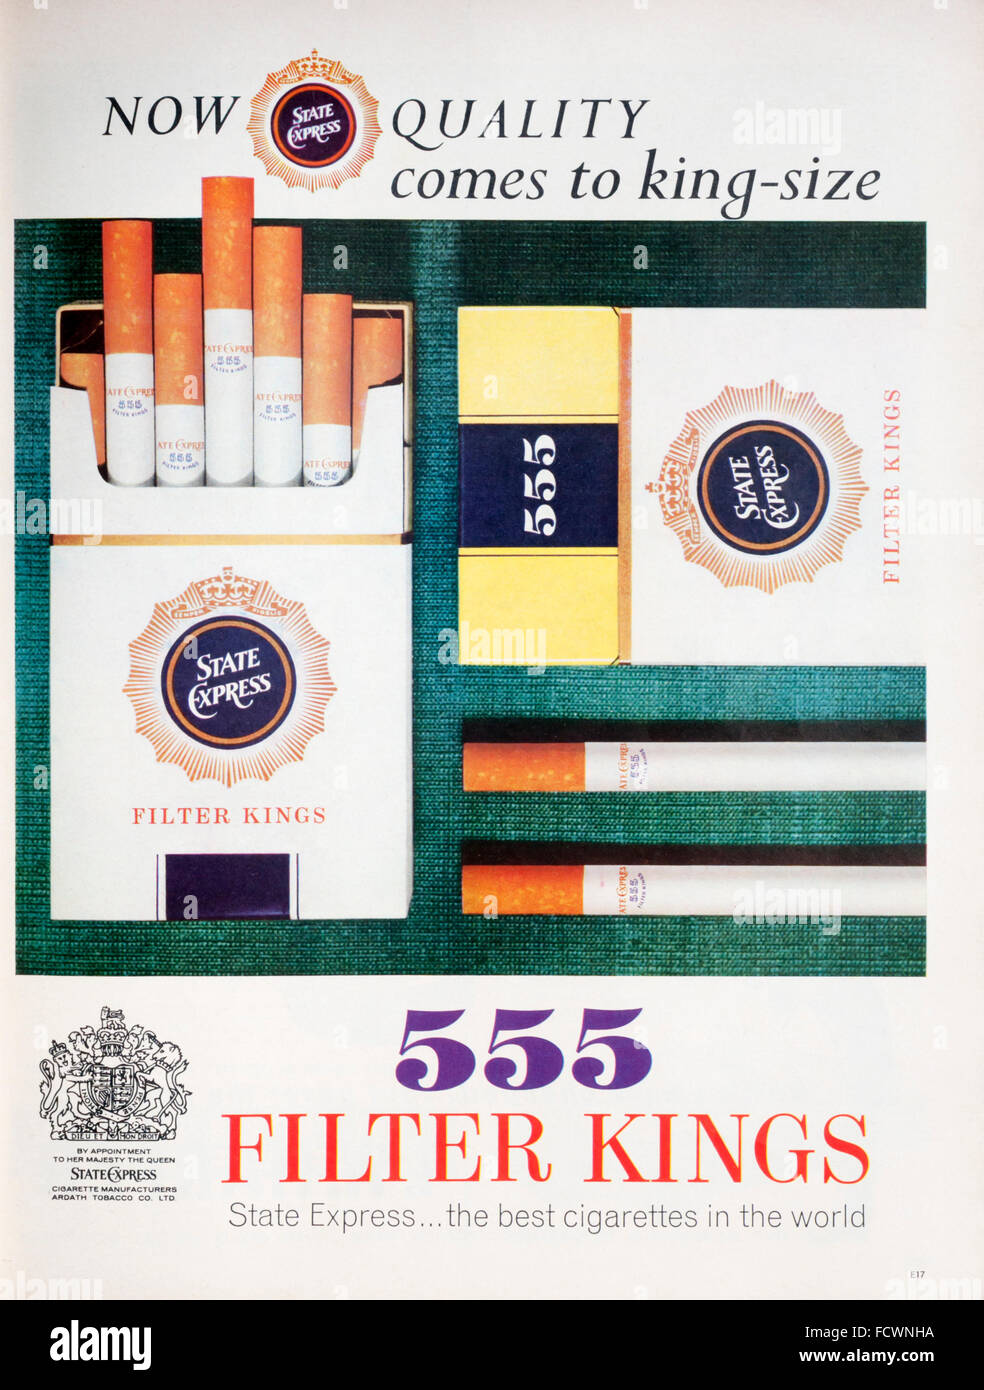 1960s magazine advertisement advertising State Express 555 Filter Kings cigarettes. Stock Photo